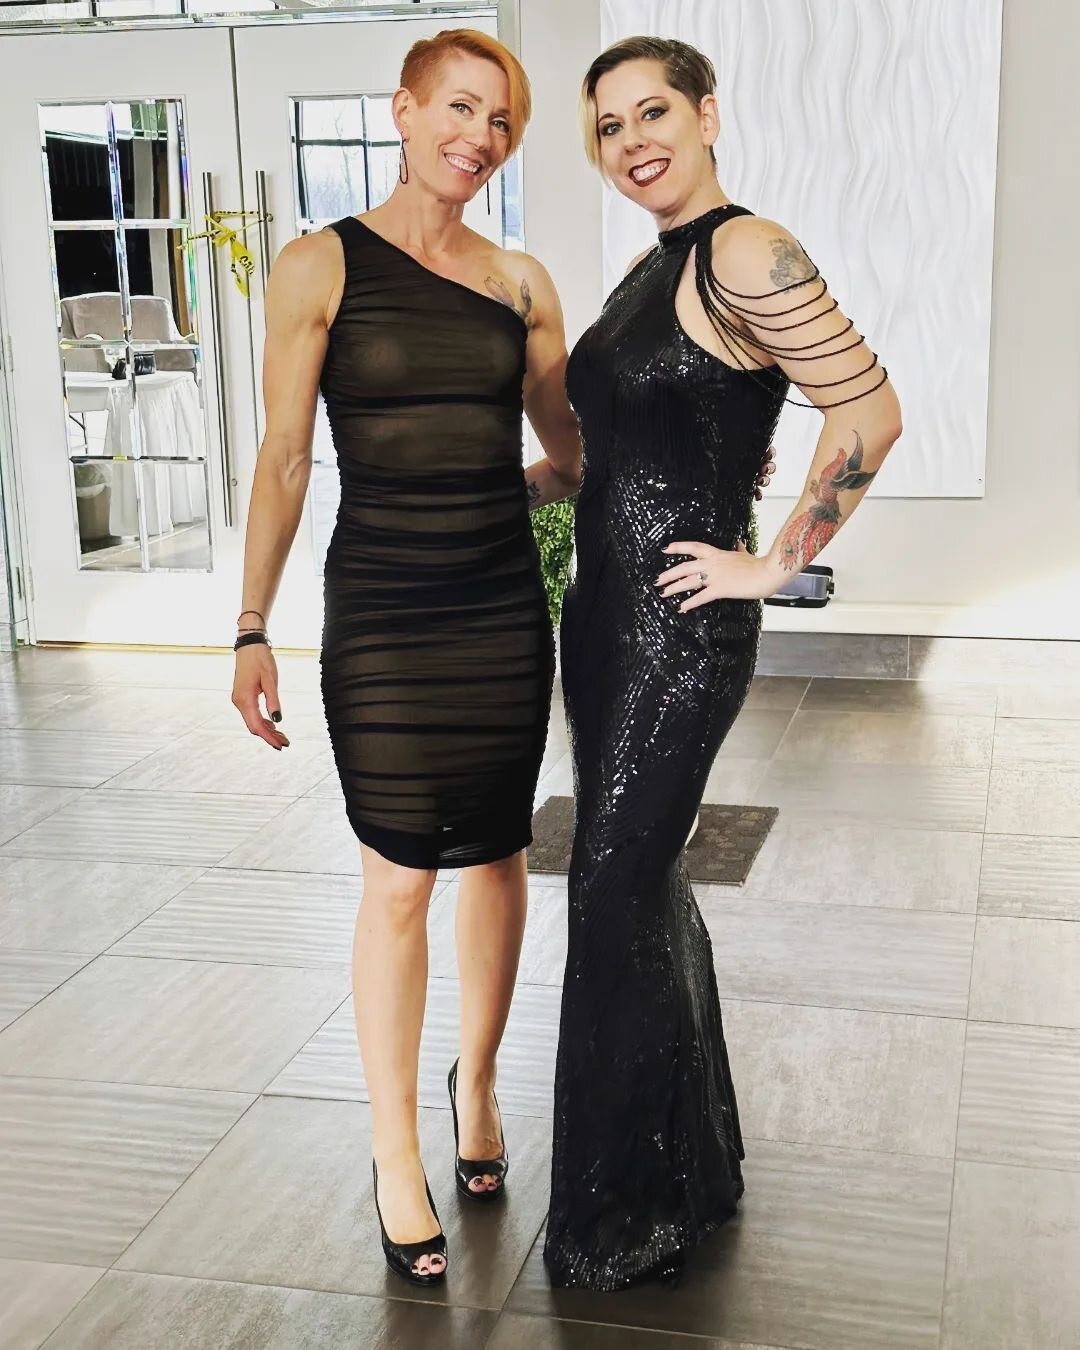 Had a blast last night supporting my dear friend Kimberly Jane Barlog and an organization that is incredibly important to her, the Justice League of WNY. 

She was instrumental in planning and executing their first ever gala! And it was a smashing su